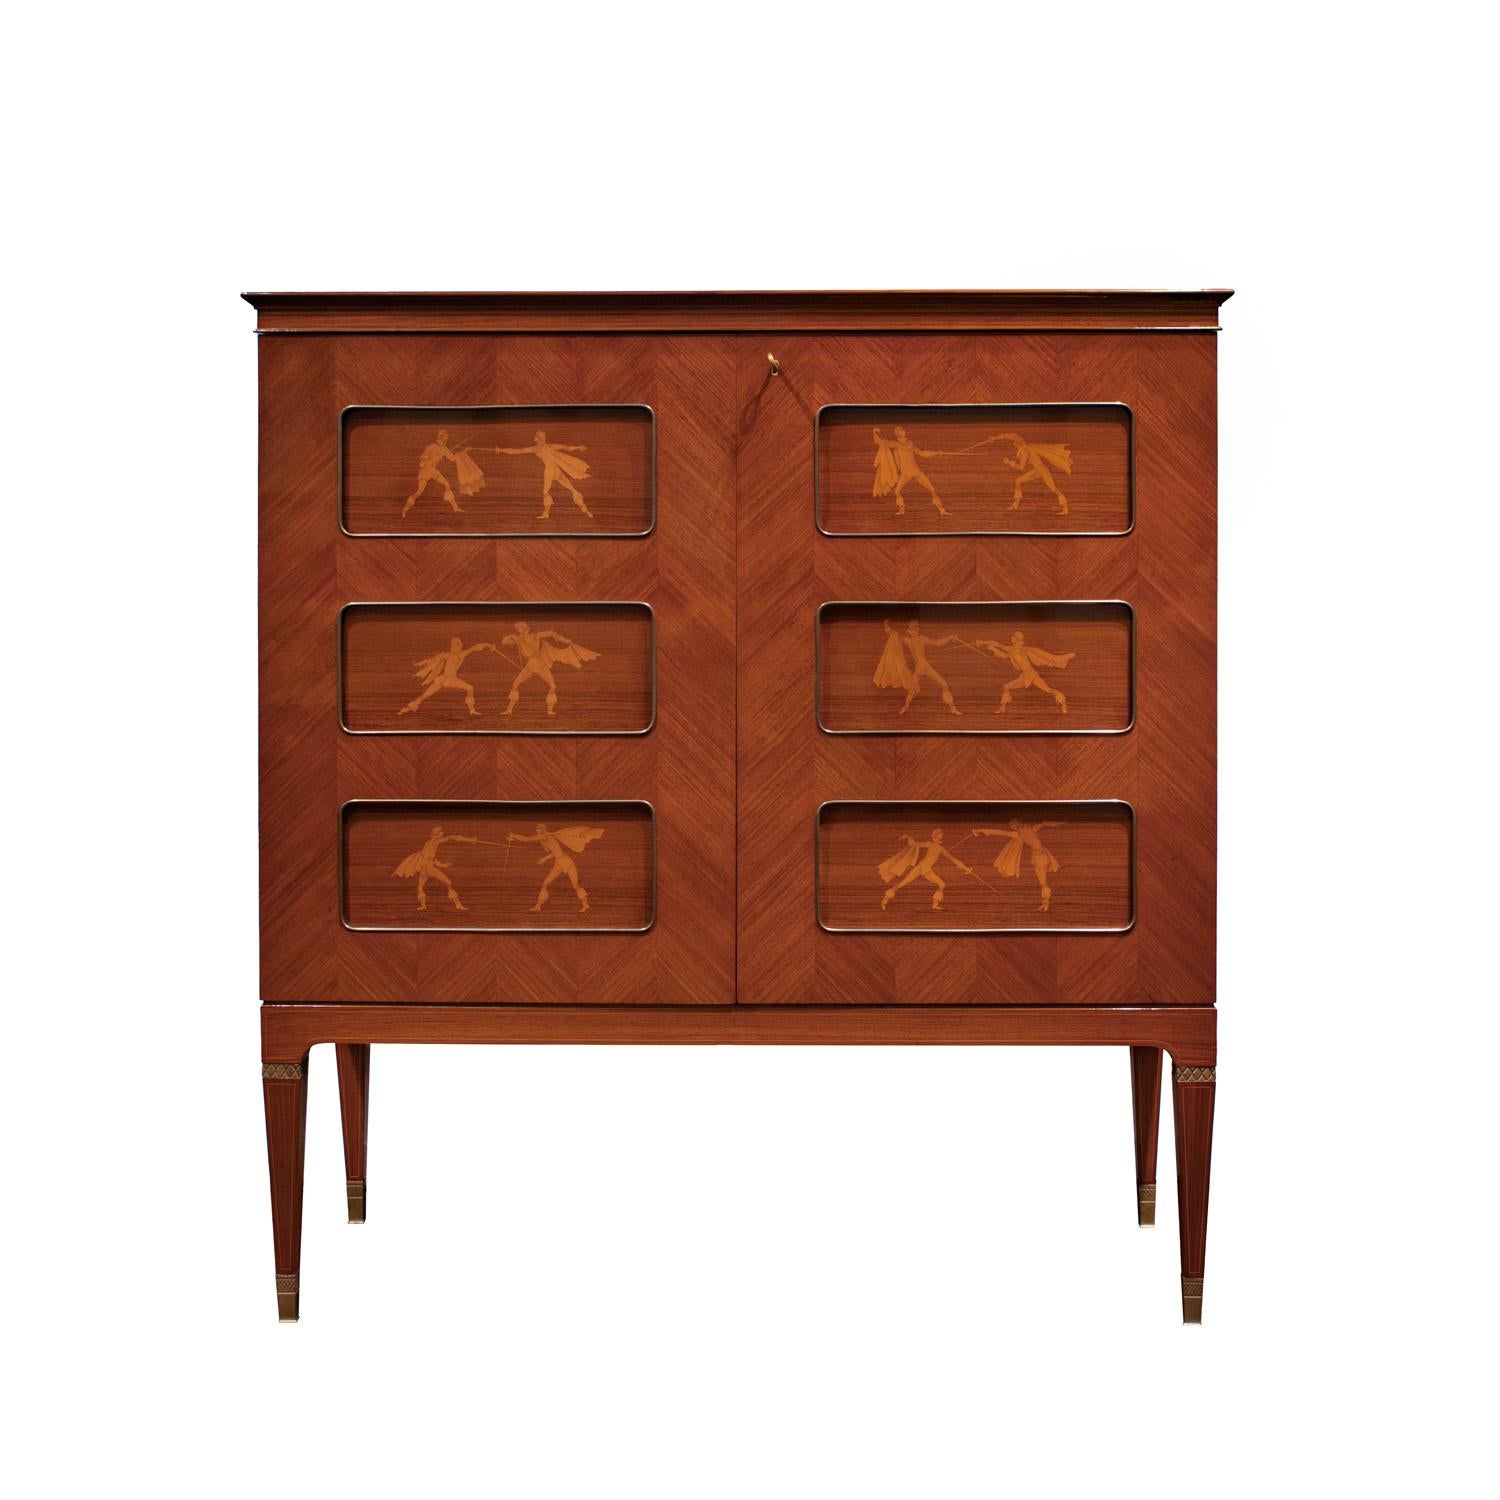 Remarkable liquor cabinet in Italian mahogany  with chevron pattern on sides and front with two doors each displaying four exquisitely inlaid fencing motifs by Paolo Buffa, Italy 1950's. Inside are four glass shelves on each door and ten drawers